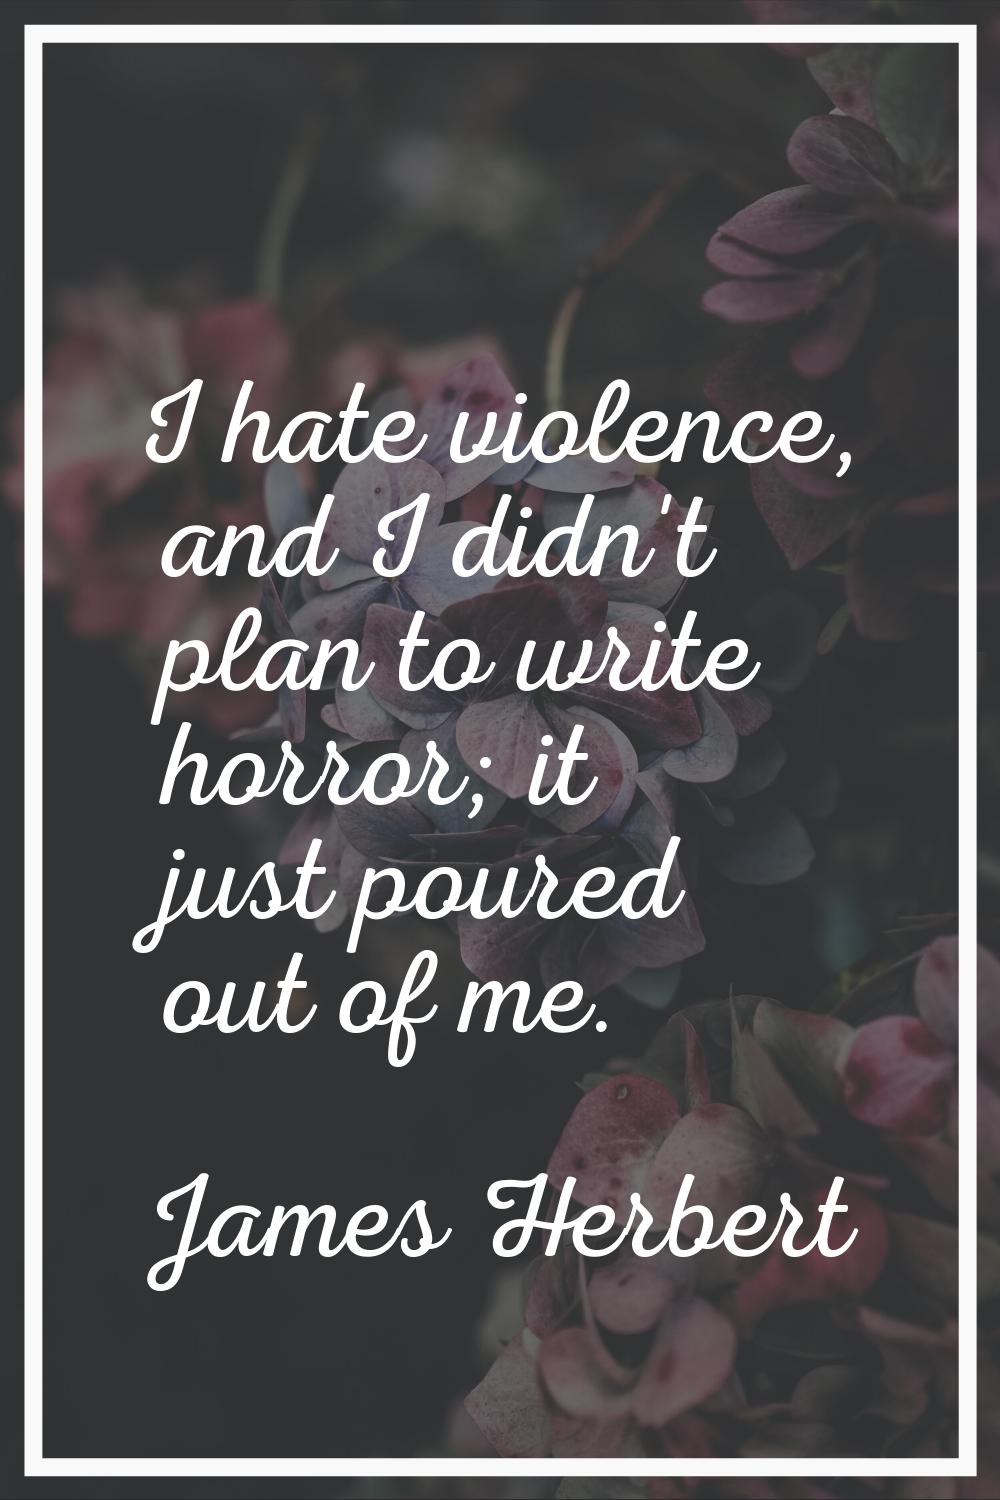 I hate violence, and I didn't plan to write horror; it just poured out of me.